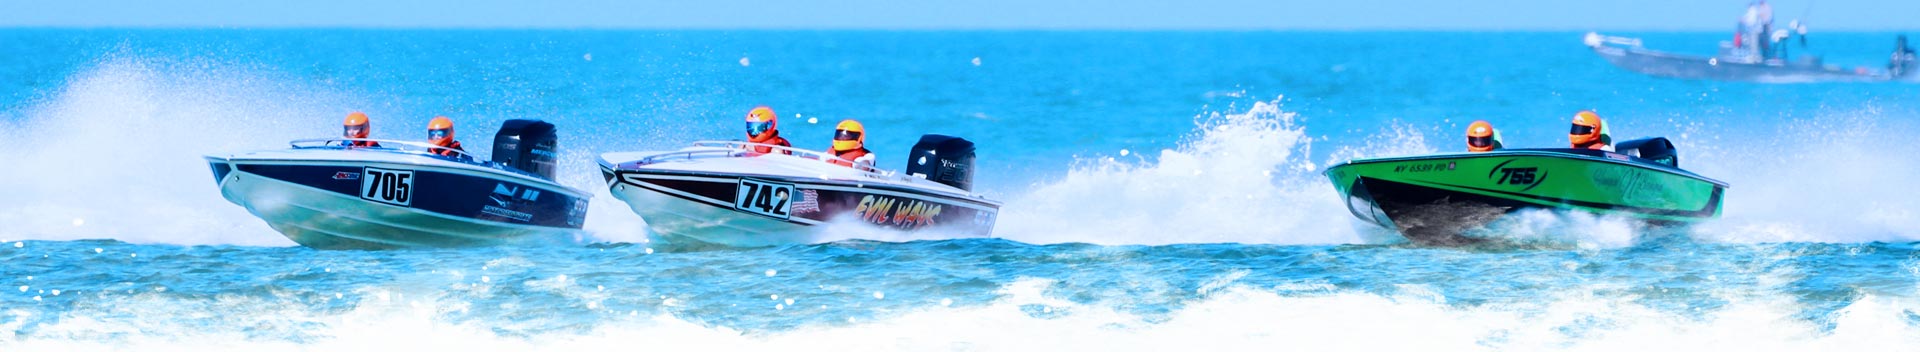 three boats racing in the 2019 OPA World Championships